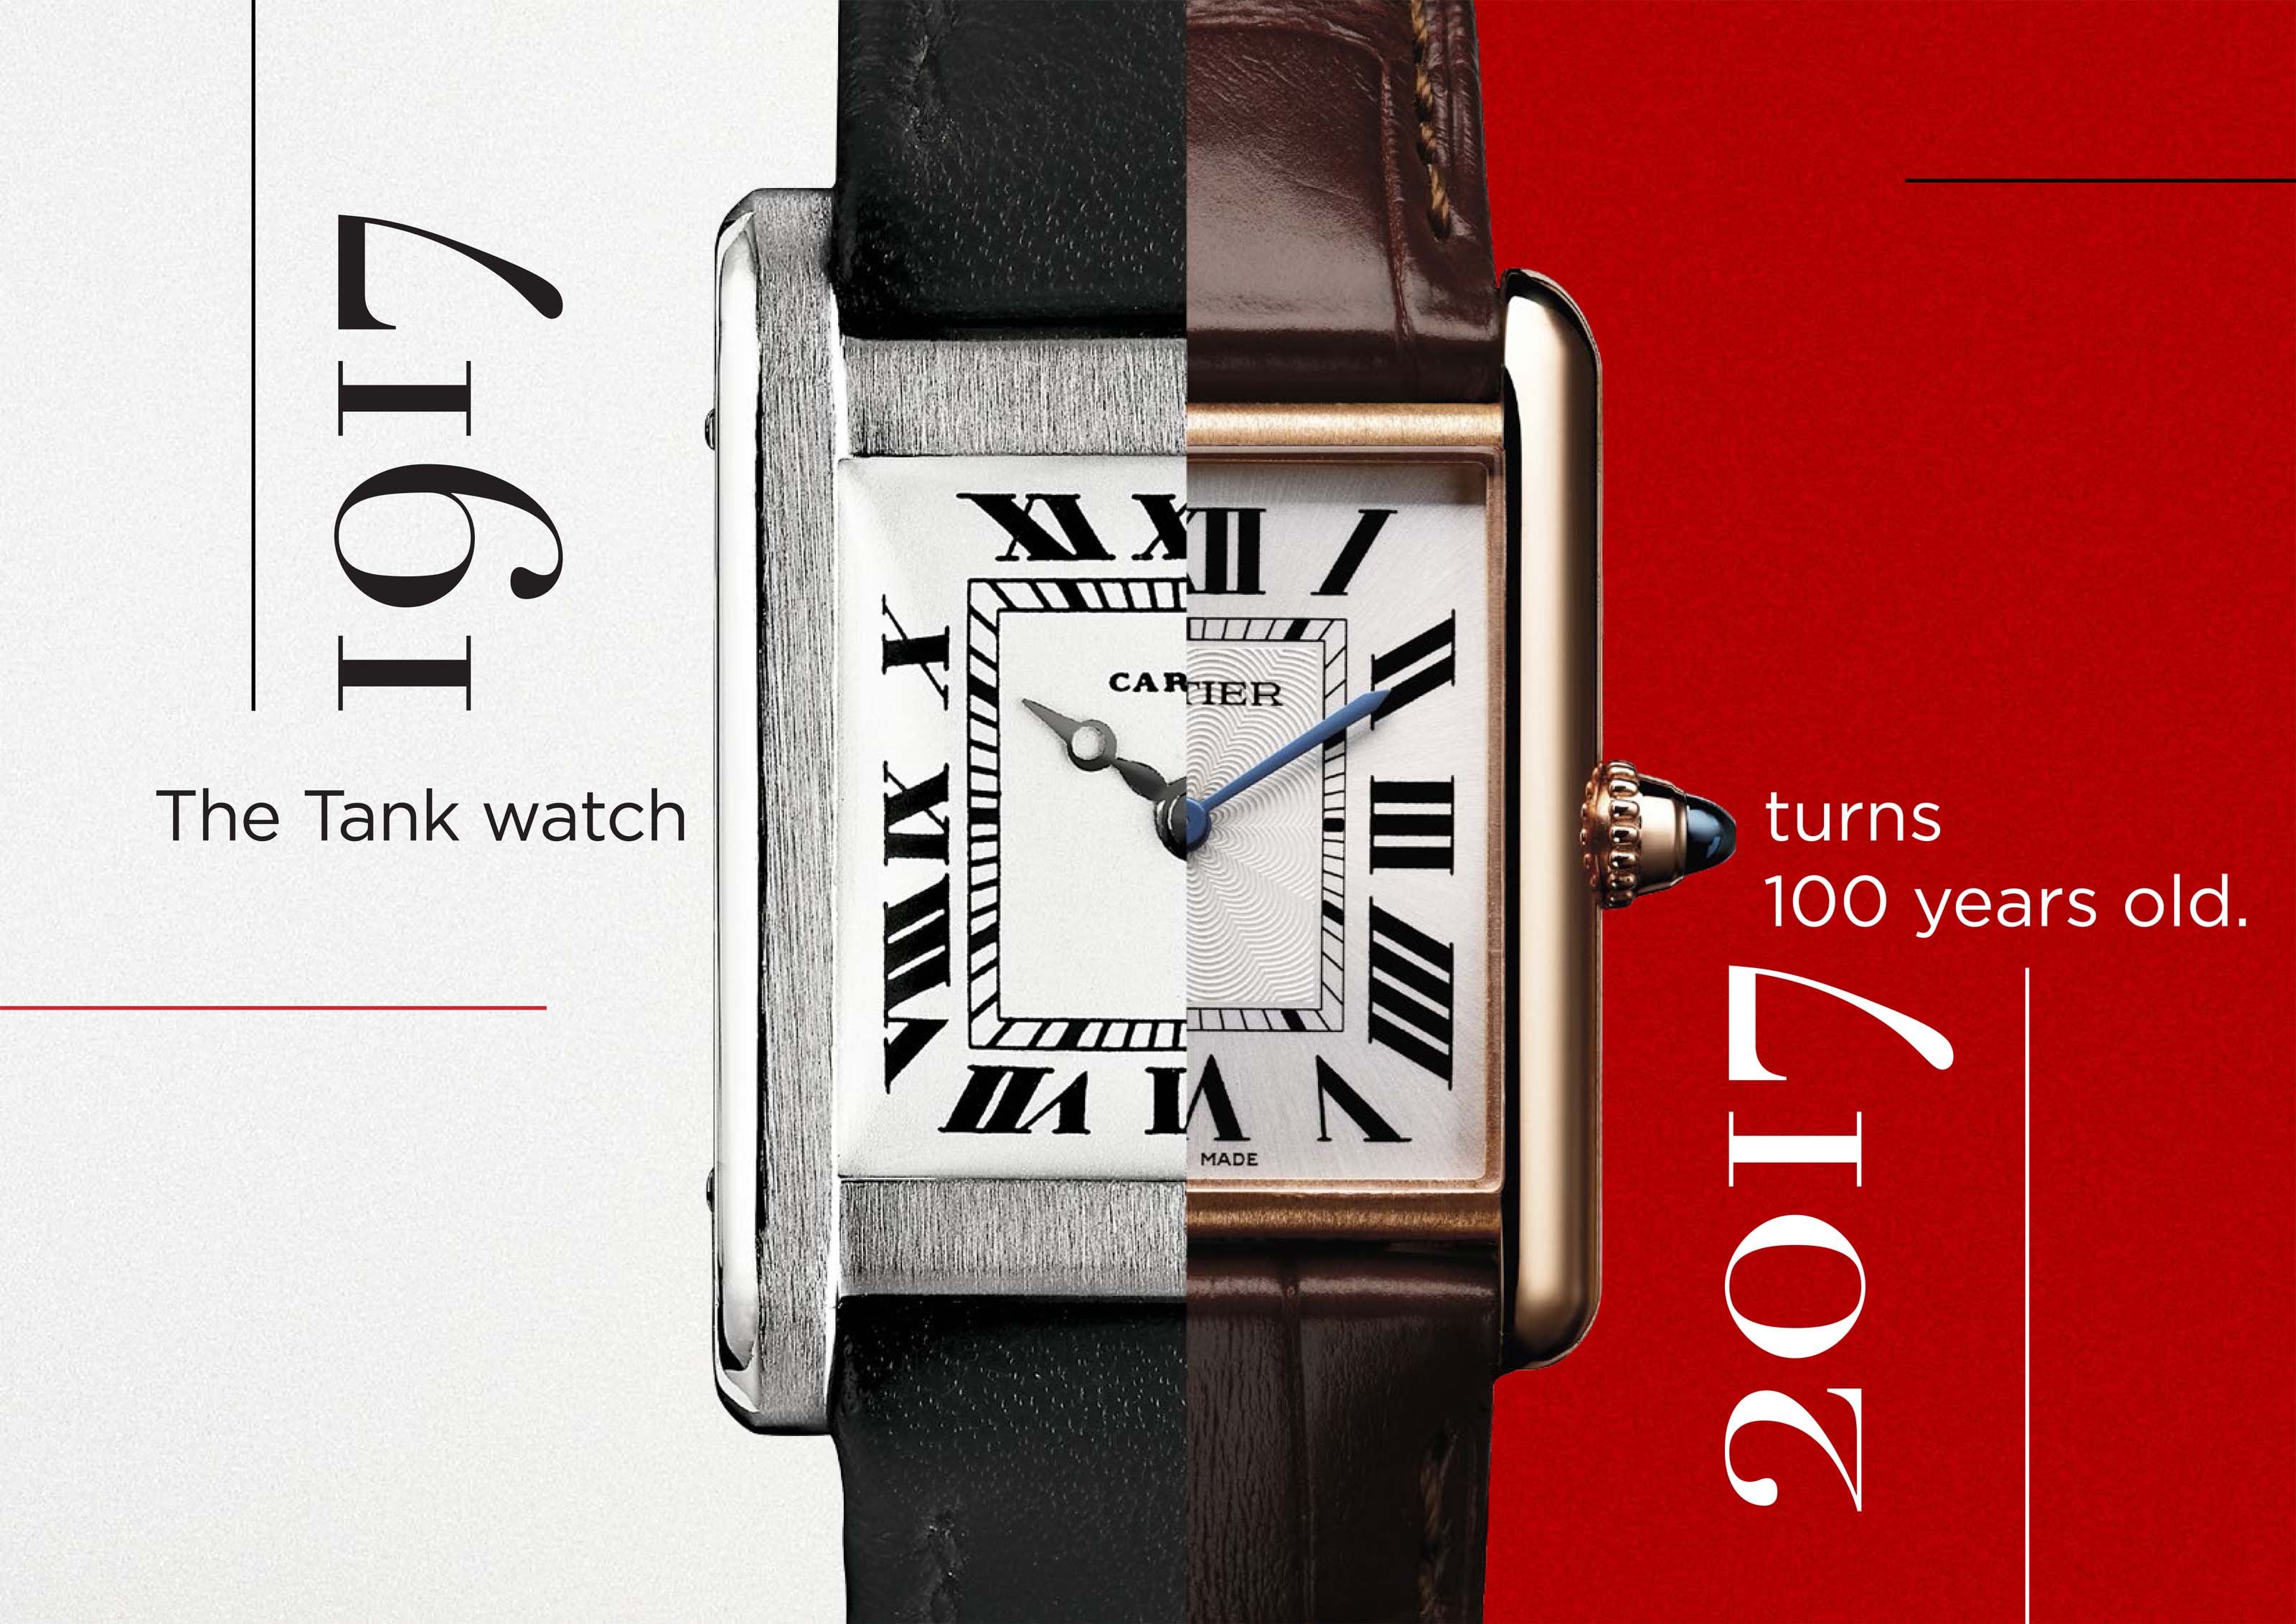 The Tank watch turns 100 years old 